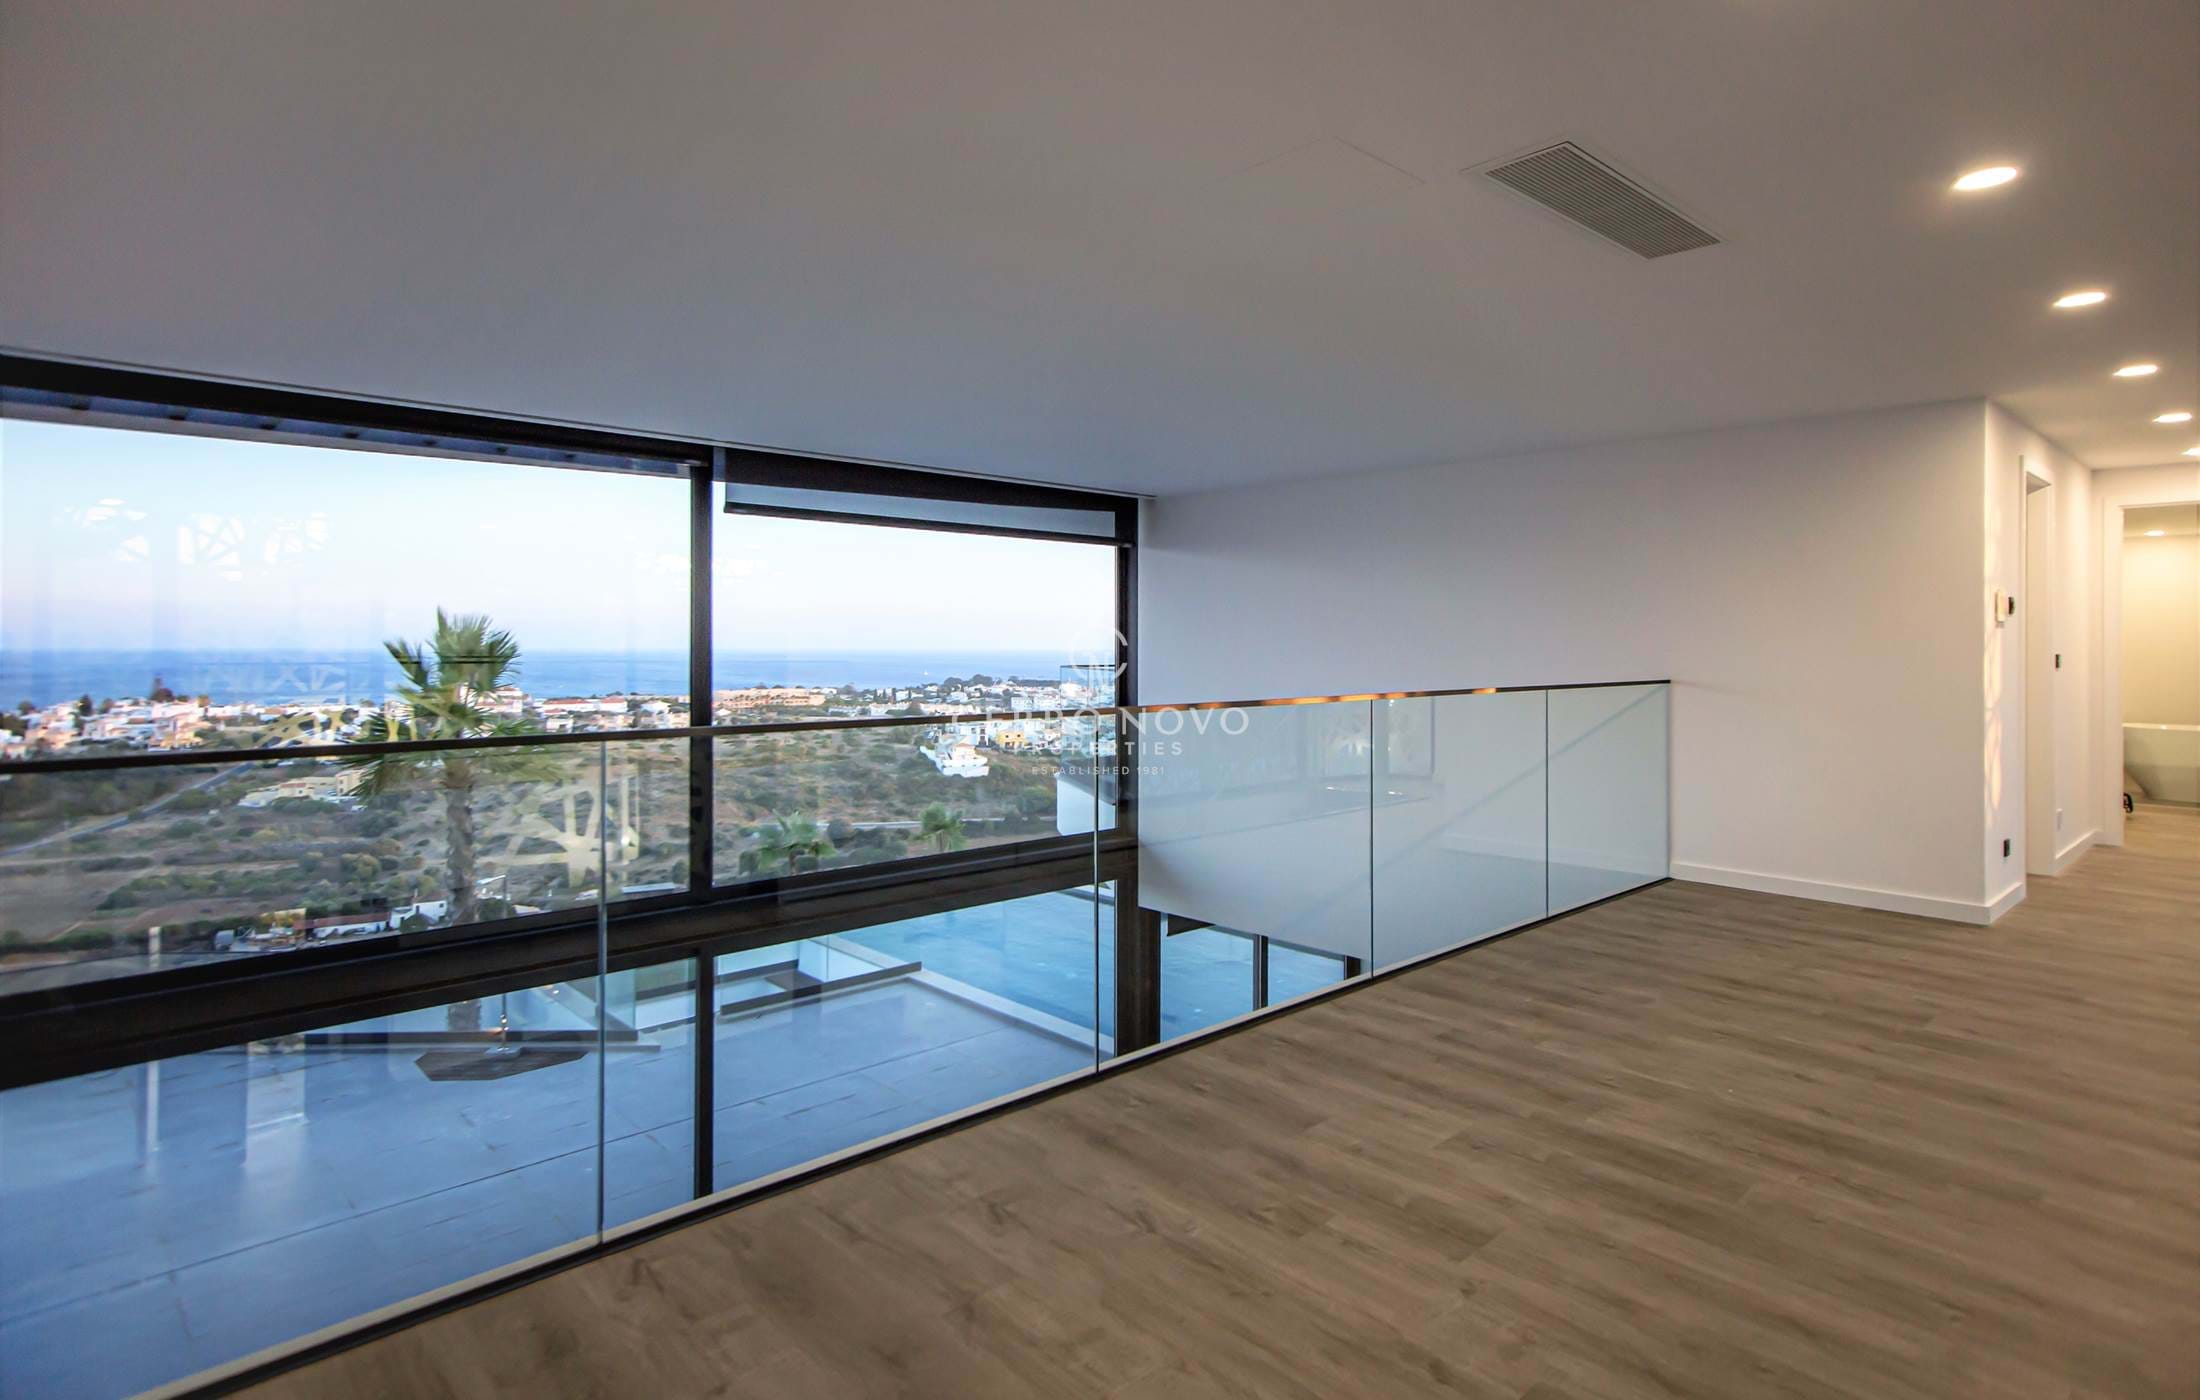 An Individually designed villa with outstanding ocean views